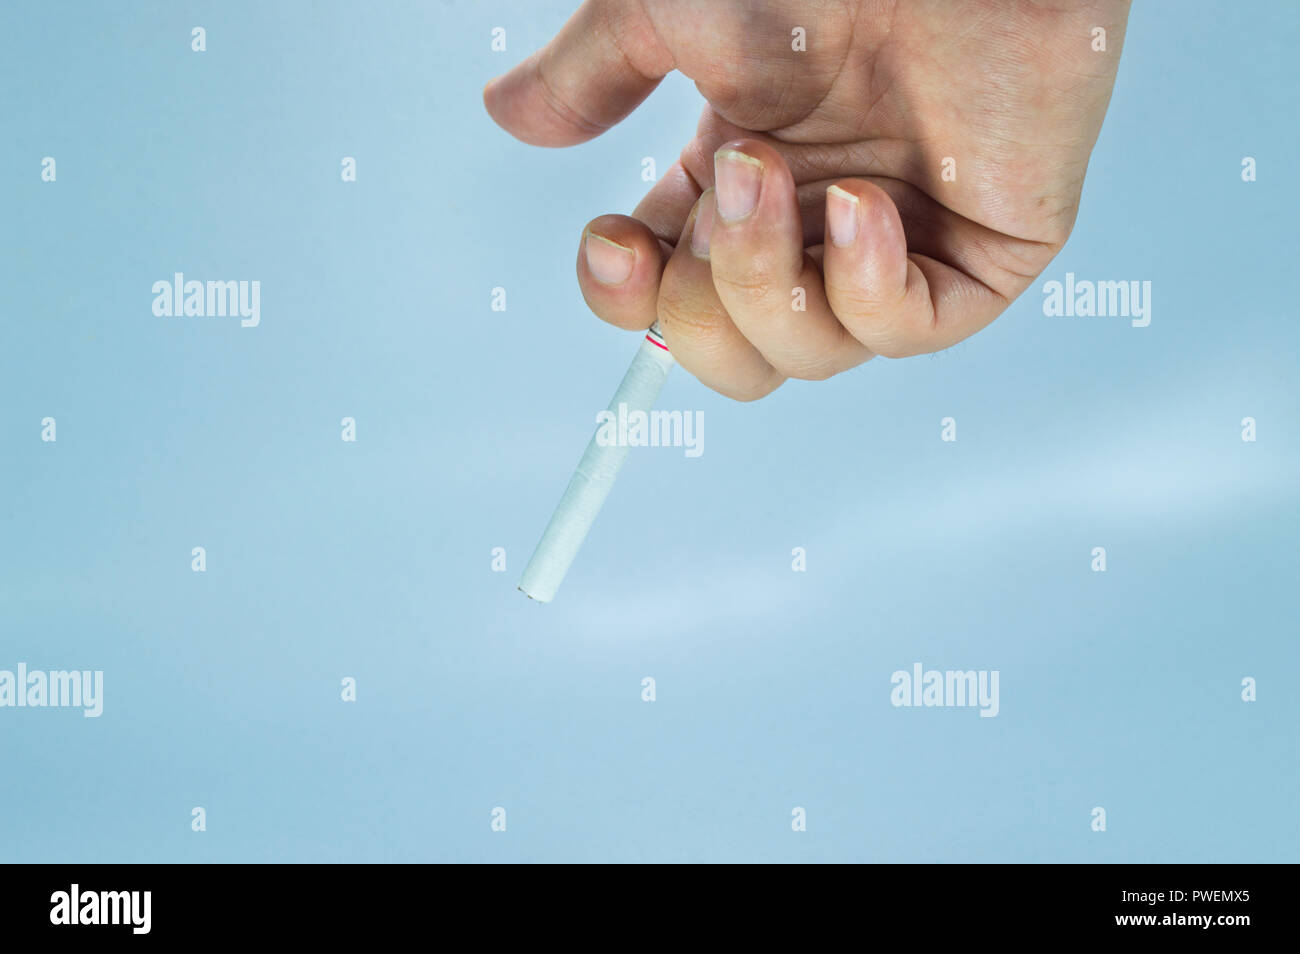 Hand holding a cigarette. Hand holding cigarette between two fingers. Stock Photo